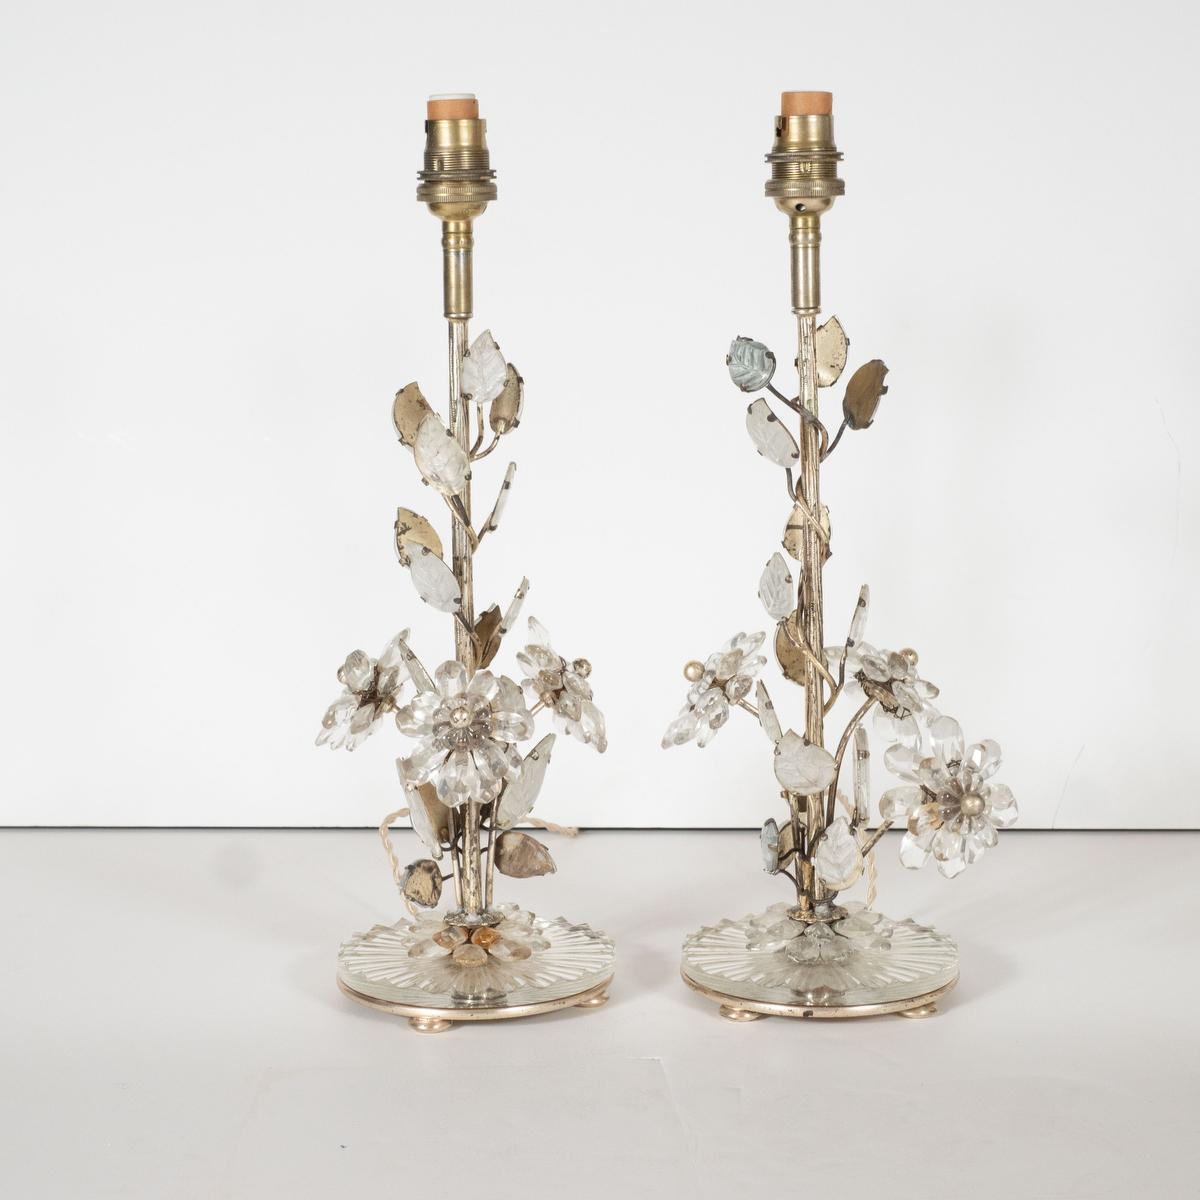 Pair of petite silver plated brass and crystal table lamps with floral motif and silver leaf details. Signed AM.